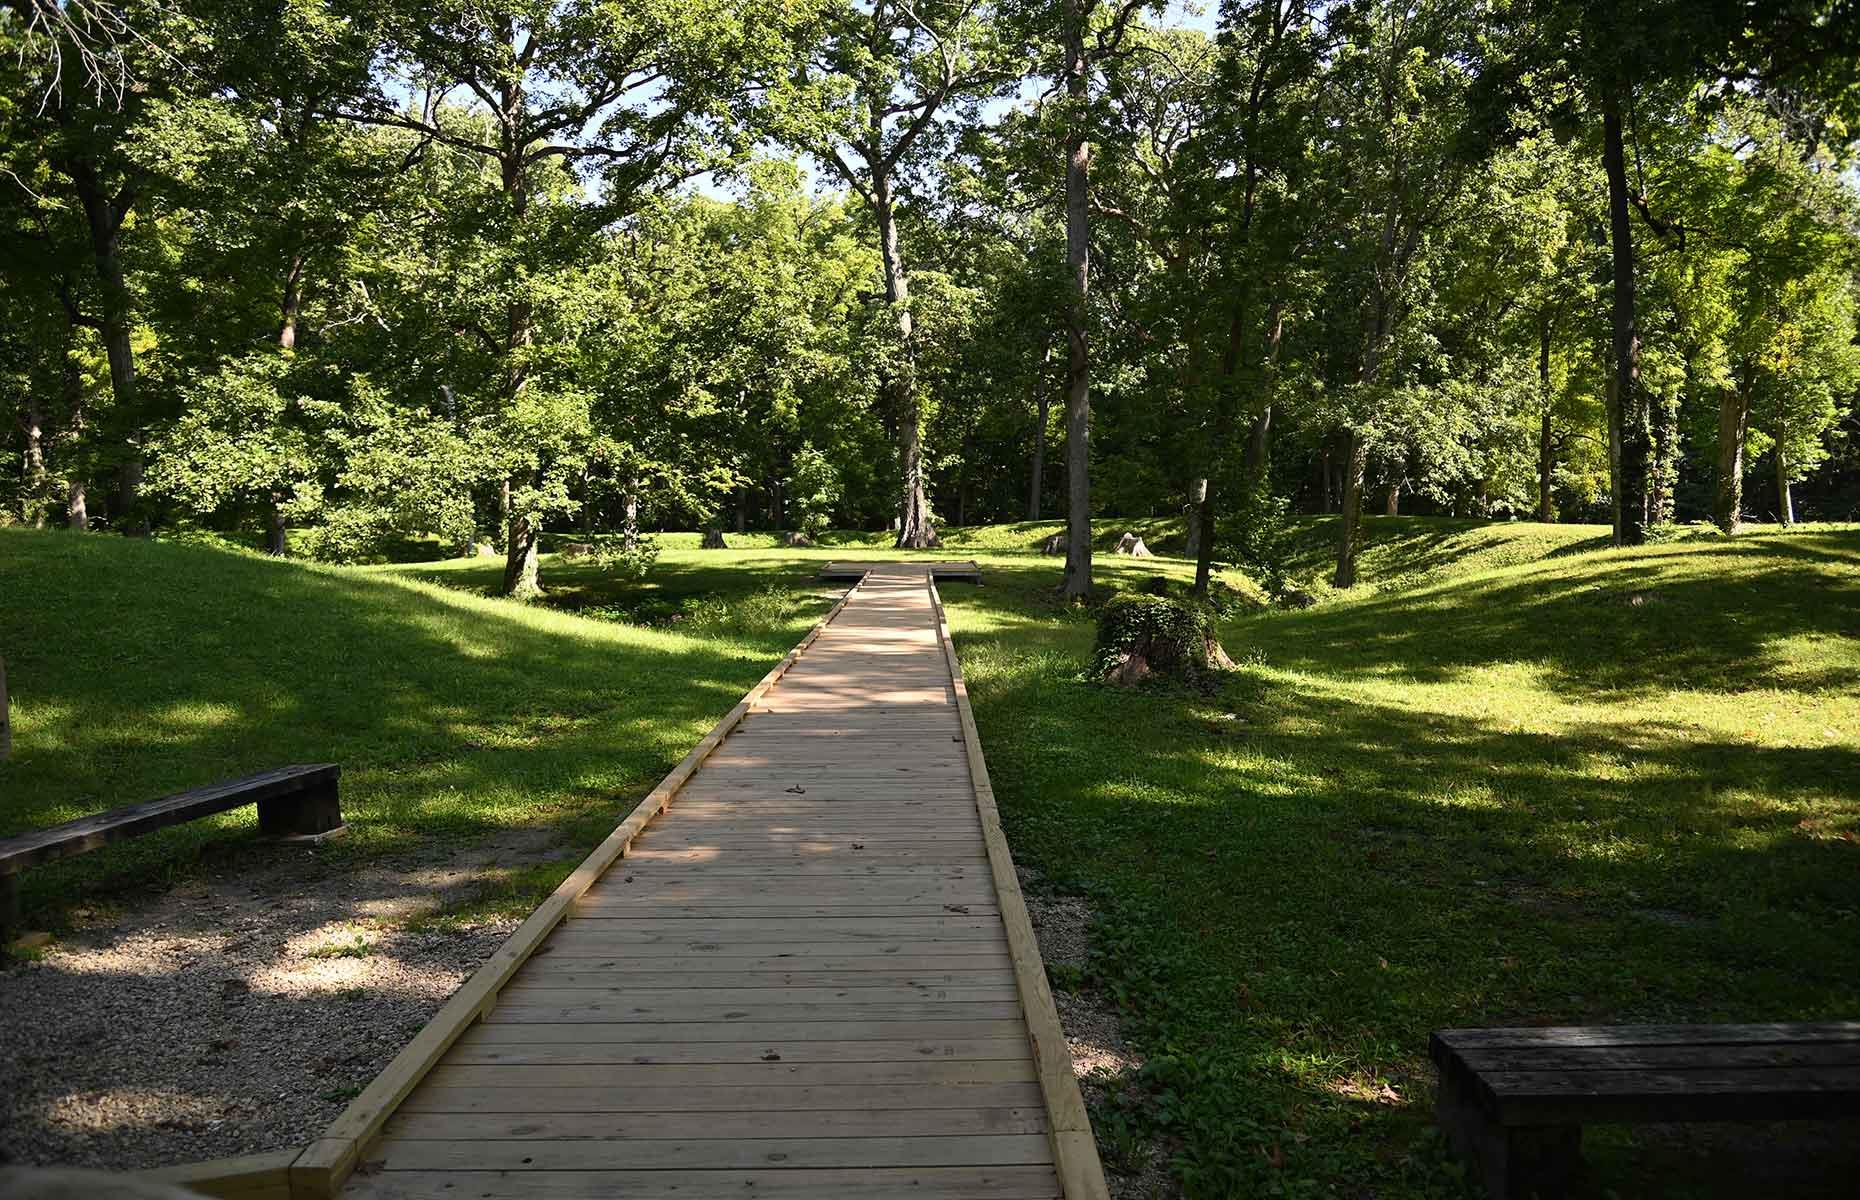 <p>The 10 earthworks that make up <a href="https://www.in.gov/dnr/state-parks/parks-lakes/mounds-state-park/">Mounds State Park</a> were built between 250 BC and AD 50, and the largest earthwork – the Great Mound – dates to 160 BC. These piles were the work of the Adena-Hopewell people, who gathered at these elevated areas for <a href="https://publichistory.iupui.edu/items/show/182">ceremonies</a> and to view astronomical alignments such as the <a href="https://www.visitindiana.com/blog/post/mounds-state-park/">summer and winter solstices</a>. The park also includes a visitor center, nature center and dedicated campground.</p>